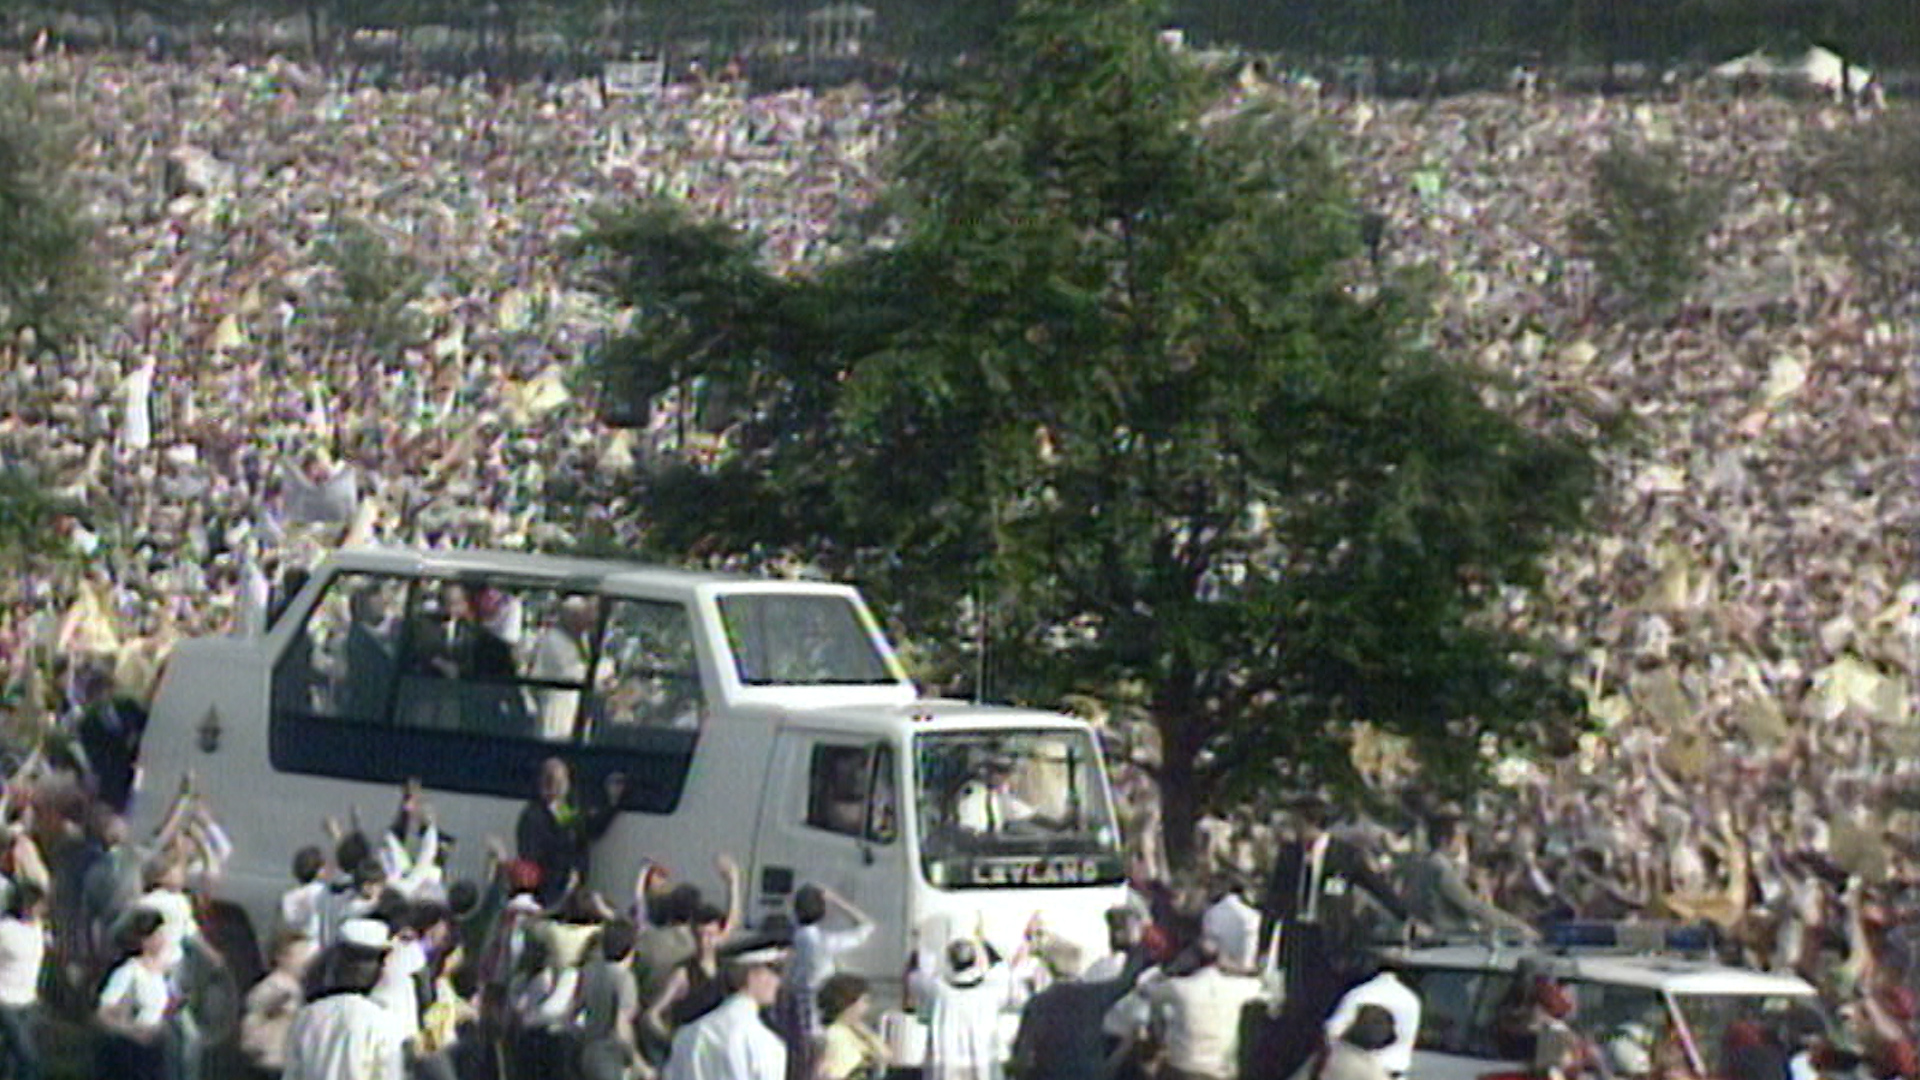 The Popemobile arrives at Bellahouston Park.